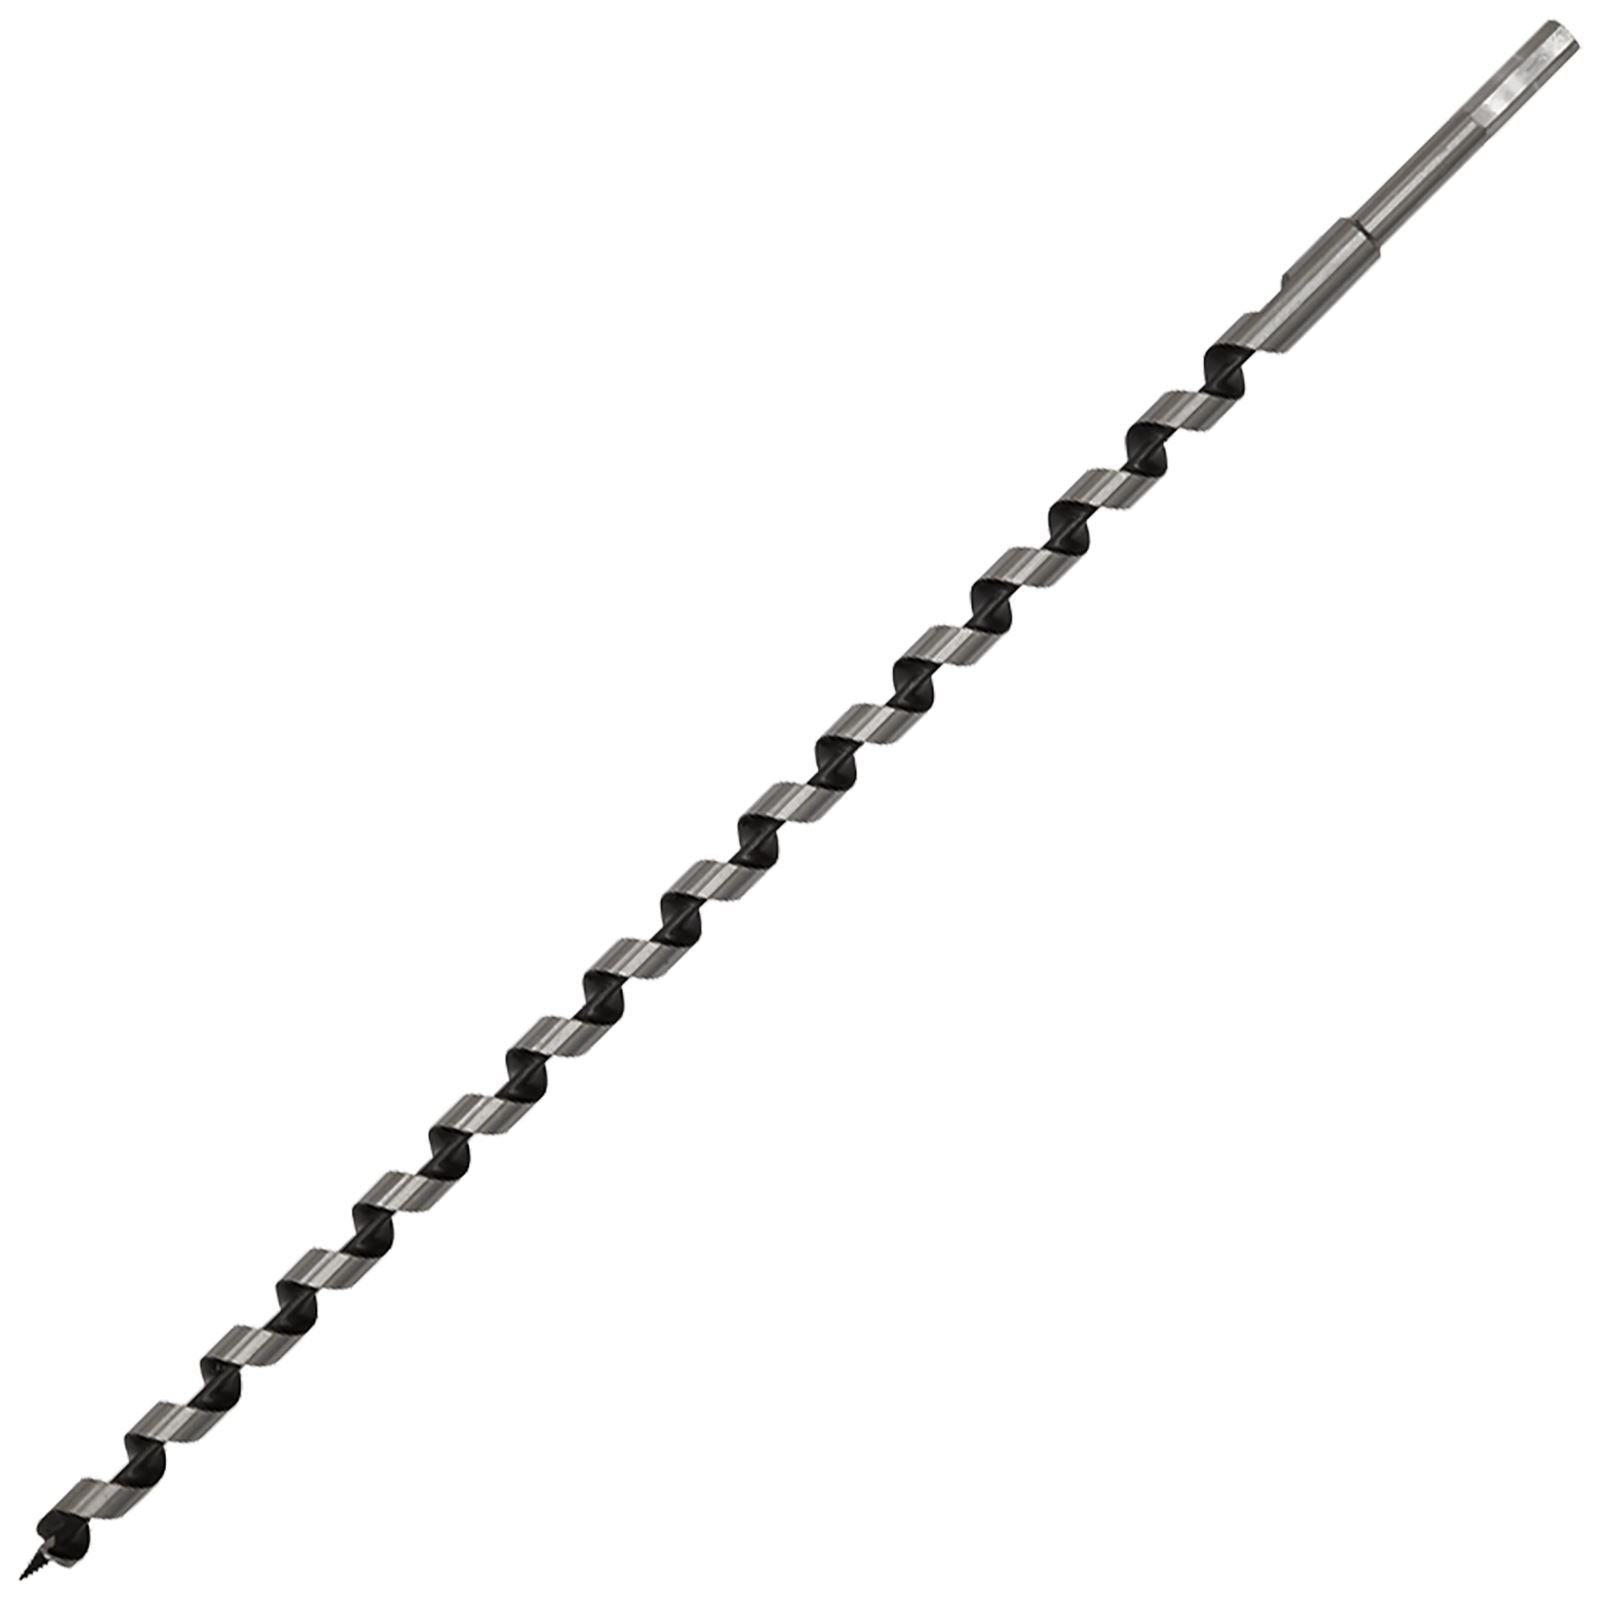 Worksafe by Sealey Auger Wood Drill Bit 14mm x 600mm